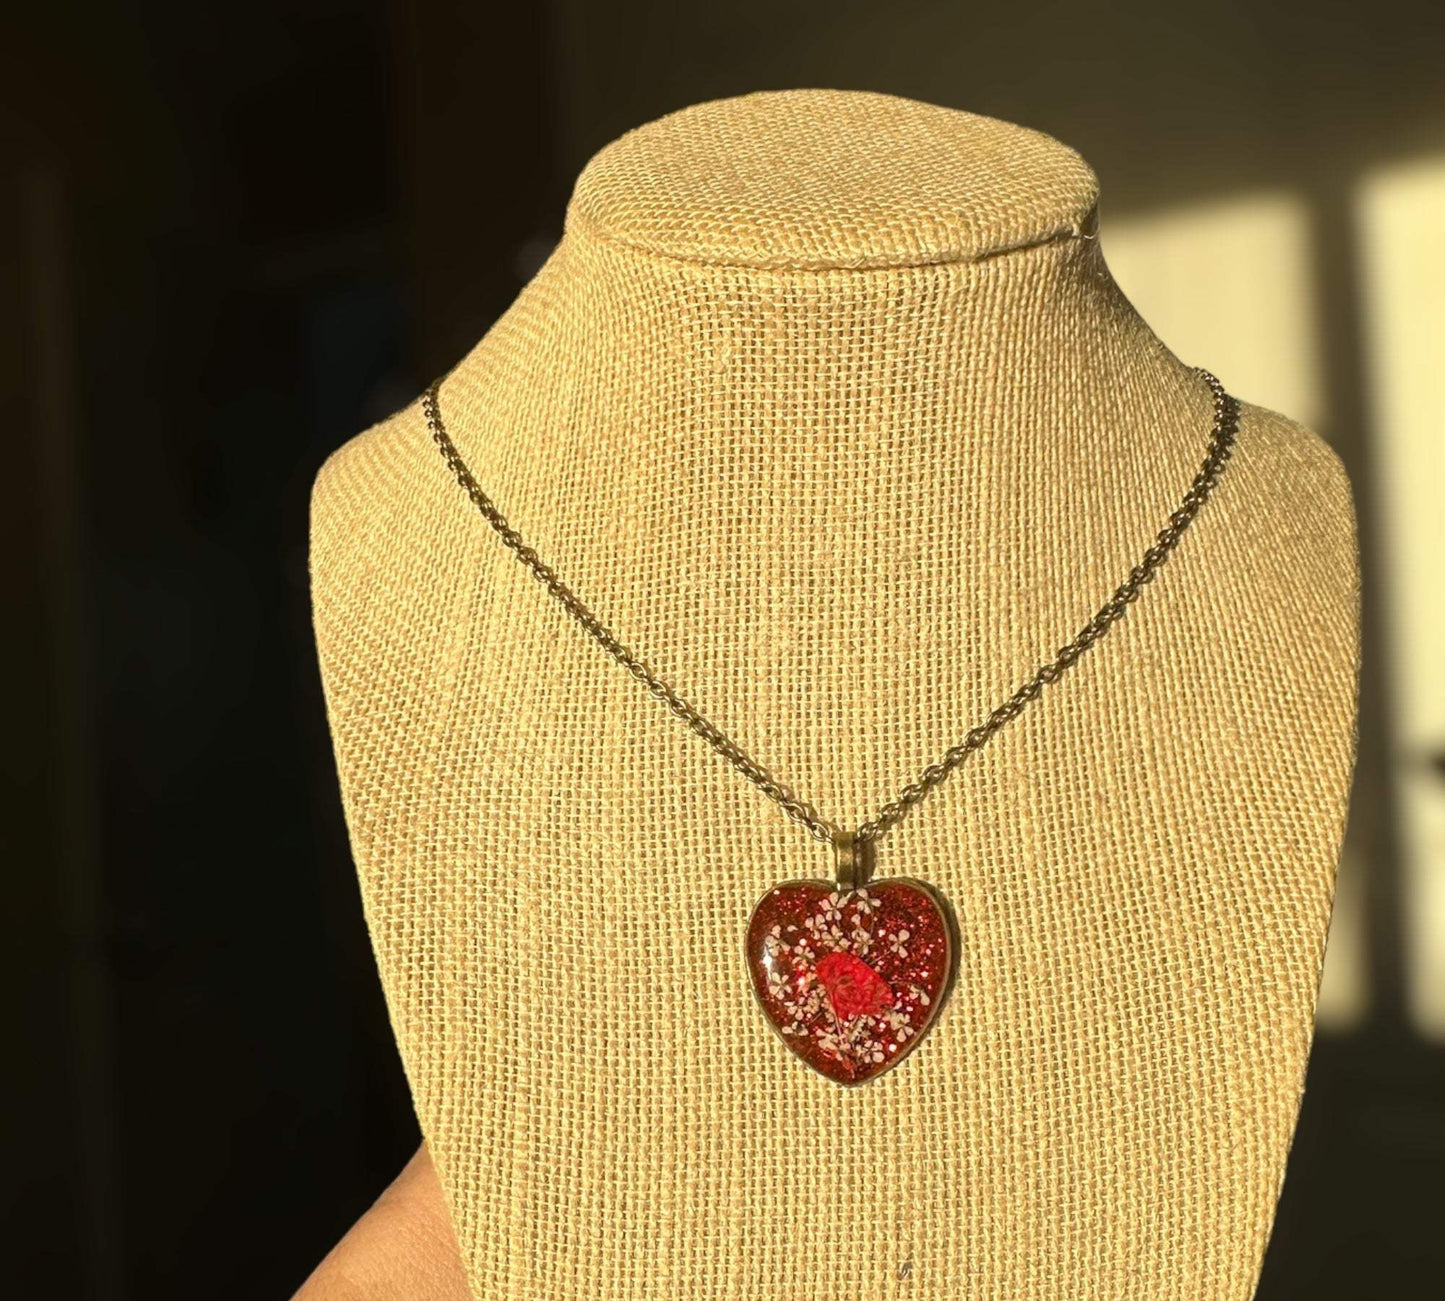 Red Heart Pendant - Antique Bronze Necklace with Pressed White FlowersRed Heart Pendant - Antique Bronze Heart with Pressed White Flowers